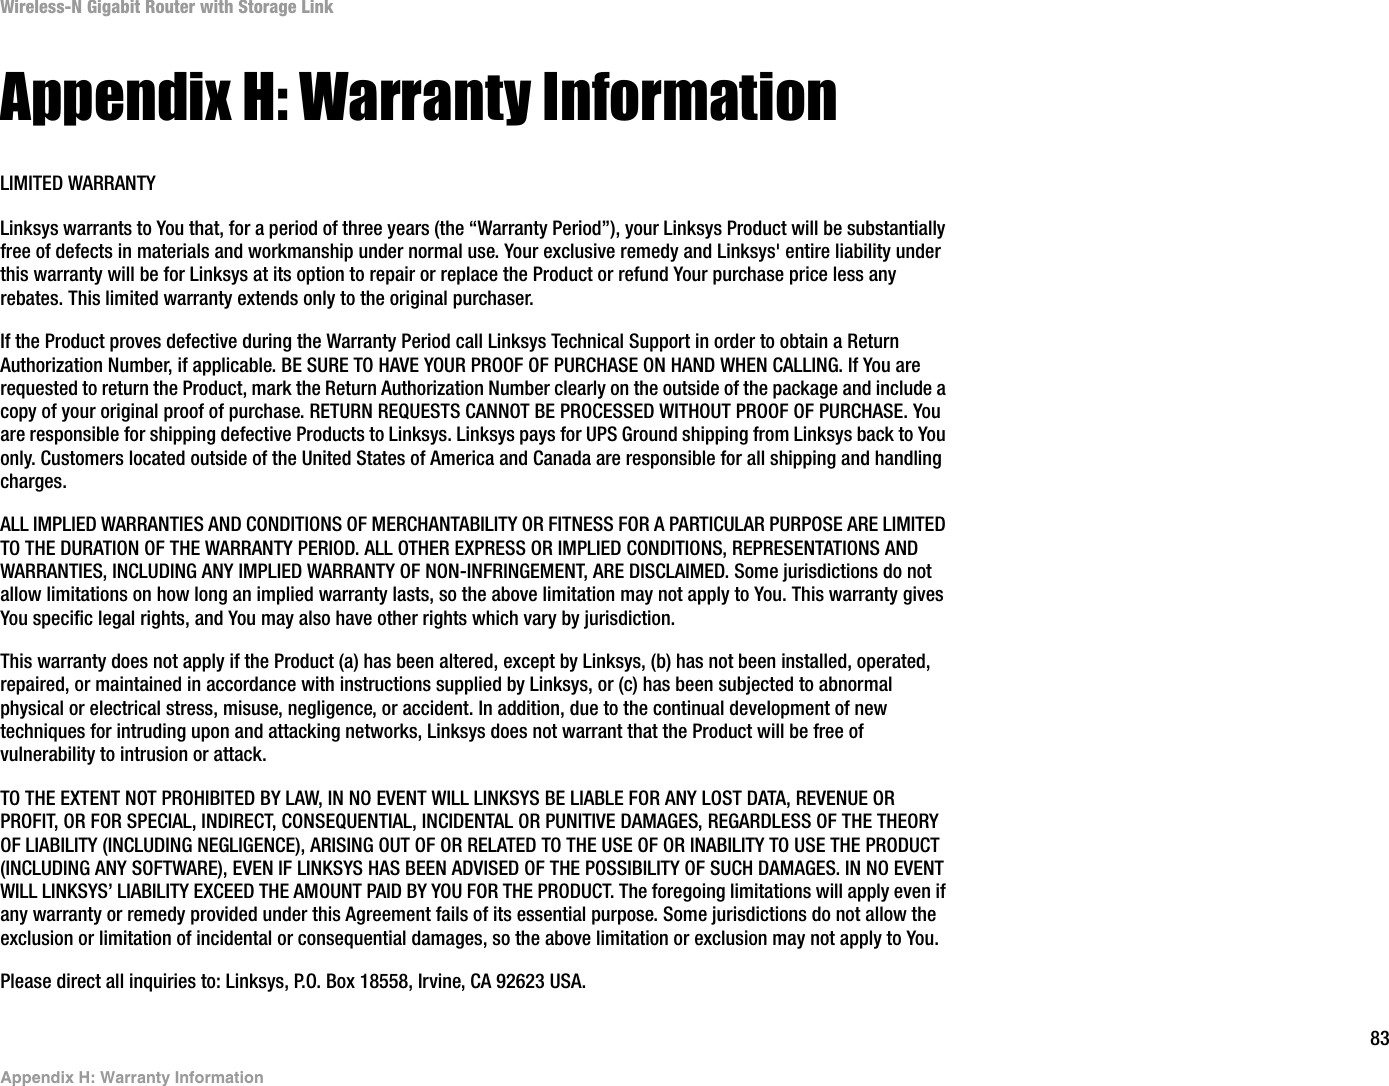 83Appendix H: Warranty InformationWireless-N Gigabit Router with Storage LinkAppendix H: Warranty InformationLIMITED WARRANTYLinksys warrants to You that, for a period of three years (the “Warranty Period”), your Linksys Product will be substantially free of defects in materials and workmanship under normal use. Your exclusive remedy and Linksys&apos; entire liability under this warranty will be for Linksys at its option to repair or replace the Product or refund Your purchase price less any rebates. This limited warranty extends only to the original purchaser. If the Product proves defective during the Warranty Period call Linksys Technical Support in order to obtain a Return Authorization Number, if applicable. BE SURE TO HAVE YOUR PROOF OF PURCHASE ON HAND WHEN CALLING. If You are requested to return the Product, mark the Return Authorization Number clearly on the outside of the package and include a copy of your original proof of purchase. RETURN REQUESTS CANNOT BE PROCESSED WITHOUT PROOF OF PURCHASE. You are responsible for shipping defective Products to Linksys. Linksys pays for UPS Ground shipping from Linksys back to You only. Customers located outside of the United States of America and Canada are responsible for all shipping and handling charges. ALL IMPLIED WARRANTIES AND CONDITIONS OF MERCHANTABILITY OR FITNESS FOR A PARTICULAR PURPOSE ARE LIMITED TO THE DURATION OF THE WARRANTY PERIOD. ALL OTHER EXPRESS OR IMPLIED CONDITIONS, REPRESENTATIONS AND WARRANTIES, INCLUDING ANY IMPLIED WARRANTY OF NON-INFRINGEMENT, ARE DISCLAIMED. Some jurisdictions do not allow limitations on how long an implied warranty lasts, so the above limitation may not apply to You. This warranty gives You specific legal rights, and You may also have other rights which vary by jurisdiction.This warranty does not apply if the Product (a) has been altered, except by Linksys, (b) has not been installed, operated, repaired, or maintained in accordance with instructions supplied by Linksys, or (c) has been subjected to abnormal physical or electrical stress, misuse, negligence, or accident. In addition, due to the continual development of new techniques for intruding upon and attacking networks, Linksys does not warrant that the Product will be free of vulnerability to intrusion or attack.TO THE EXTENT NOT PROHIBITED BY LAW, IN NO EVENT WILL LINKSYS BE LIABLE FOR ANY LOST DATA, REVENUE OR PROFIT, OR FOR SPECIAL, INDIRECT, CONSEQUENTIAL, INCIDENTAL OR PUNITIVE DAMAGES, REGARDLESS OF THE THEORY OF LIABILITY (INCLUDING NEGLIGENCE), ARISING OUT OF OR RELATED TO THE USE OF OR INABILITY TO USE THE PRODUCT (INCLUDING ANY SOFTWARE), EVEN IF LINKSYS HAS BEEN ADVISED OF THE POSSIBILITY OF SUCH DAMAGES. IN NO EVENT WILL LINKSYS’ LIABILITY EXCEED THE AMOUNT PAID BY YOU FOR THE PRODUCT. The foregoing limitations will apply even if any warranty or remedy provided under this Agreement fails of its essential purpose. Some jurisdictions do not allow the exclusion or limitation of incidental or consequential damages, so the above limitation or exclusion may not apply to You.Please direct all inquiries to: Linksys, P.O. Box 18558, Irvine, CA 92623 USA.